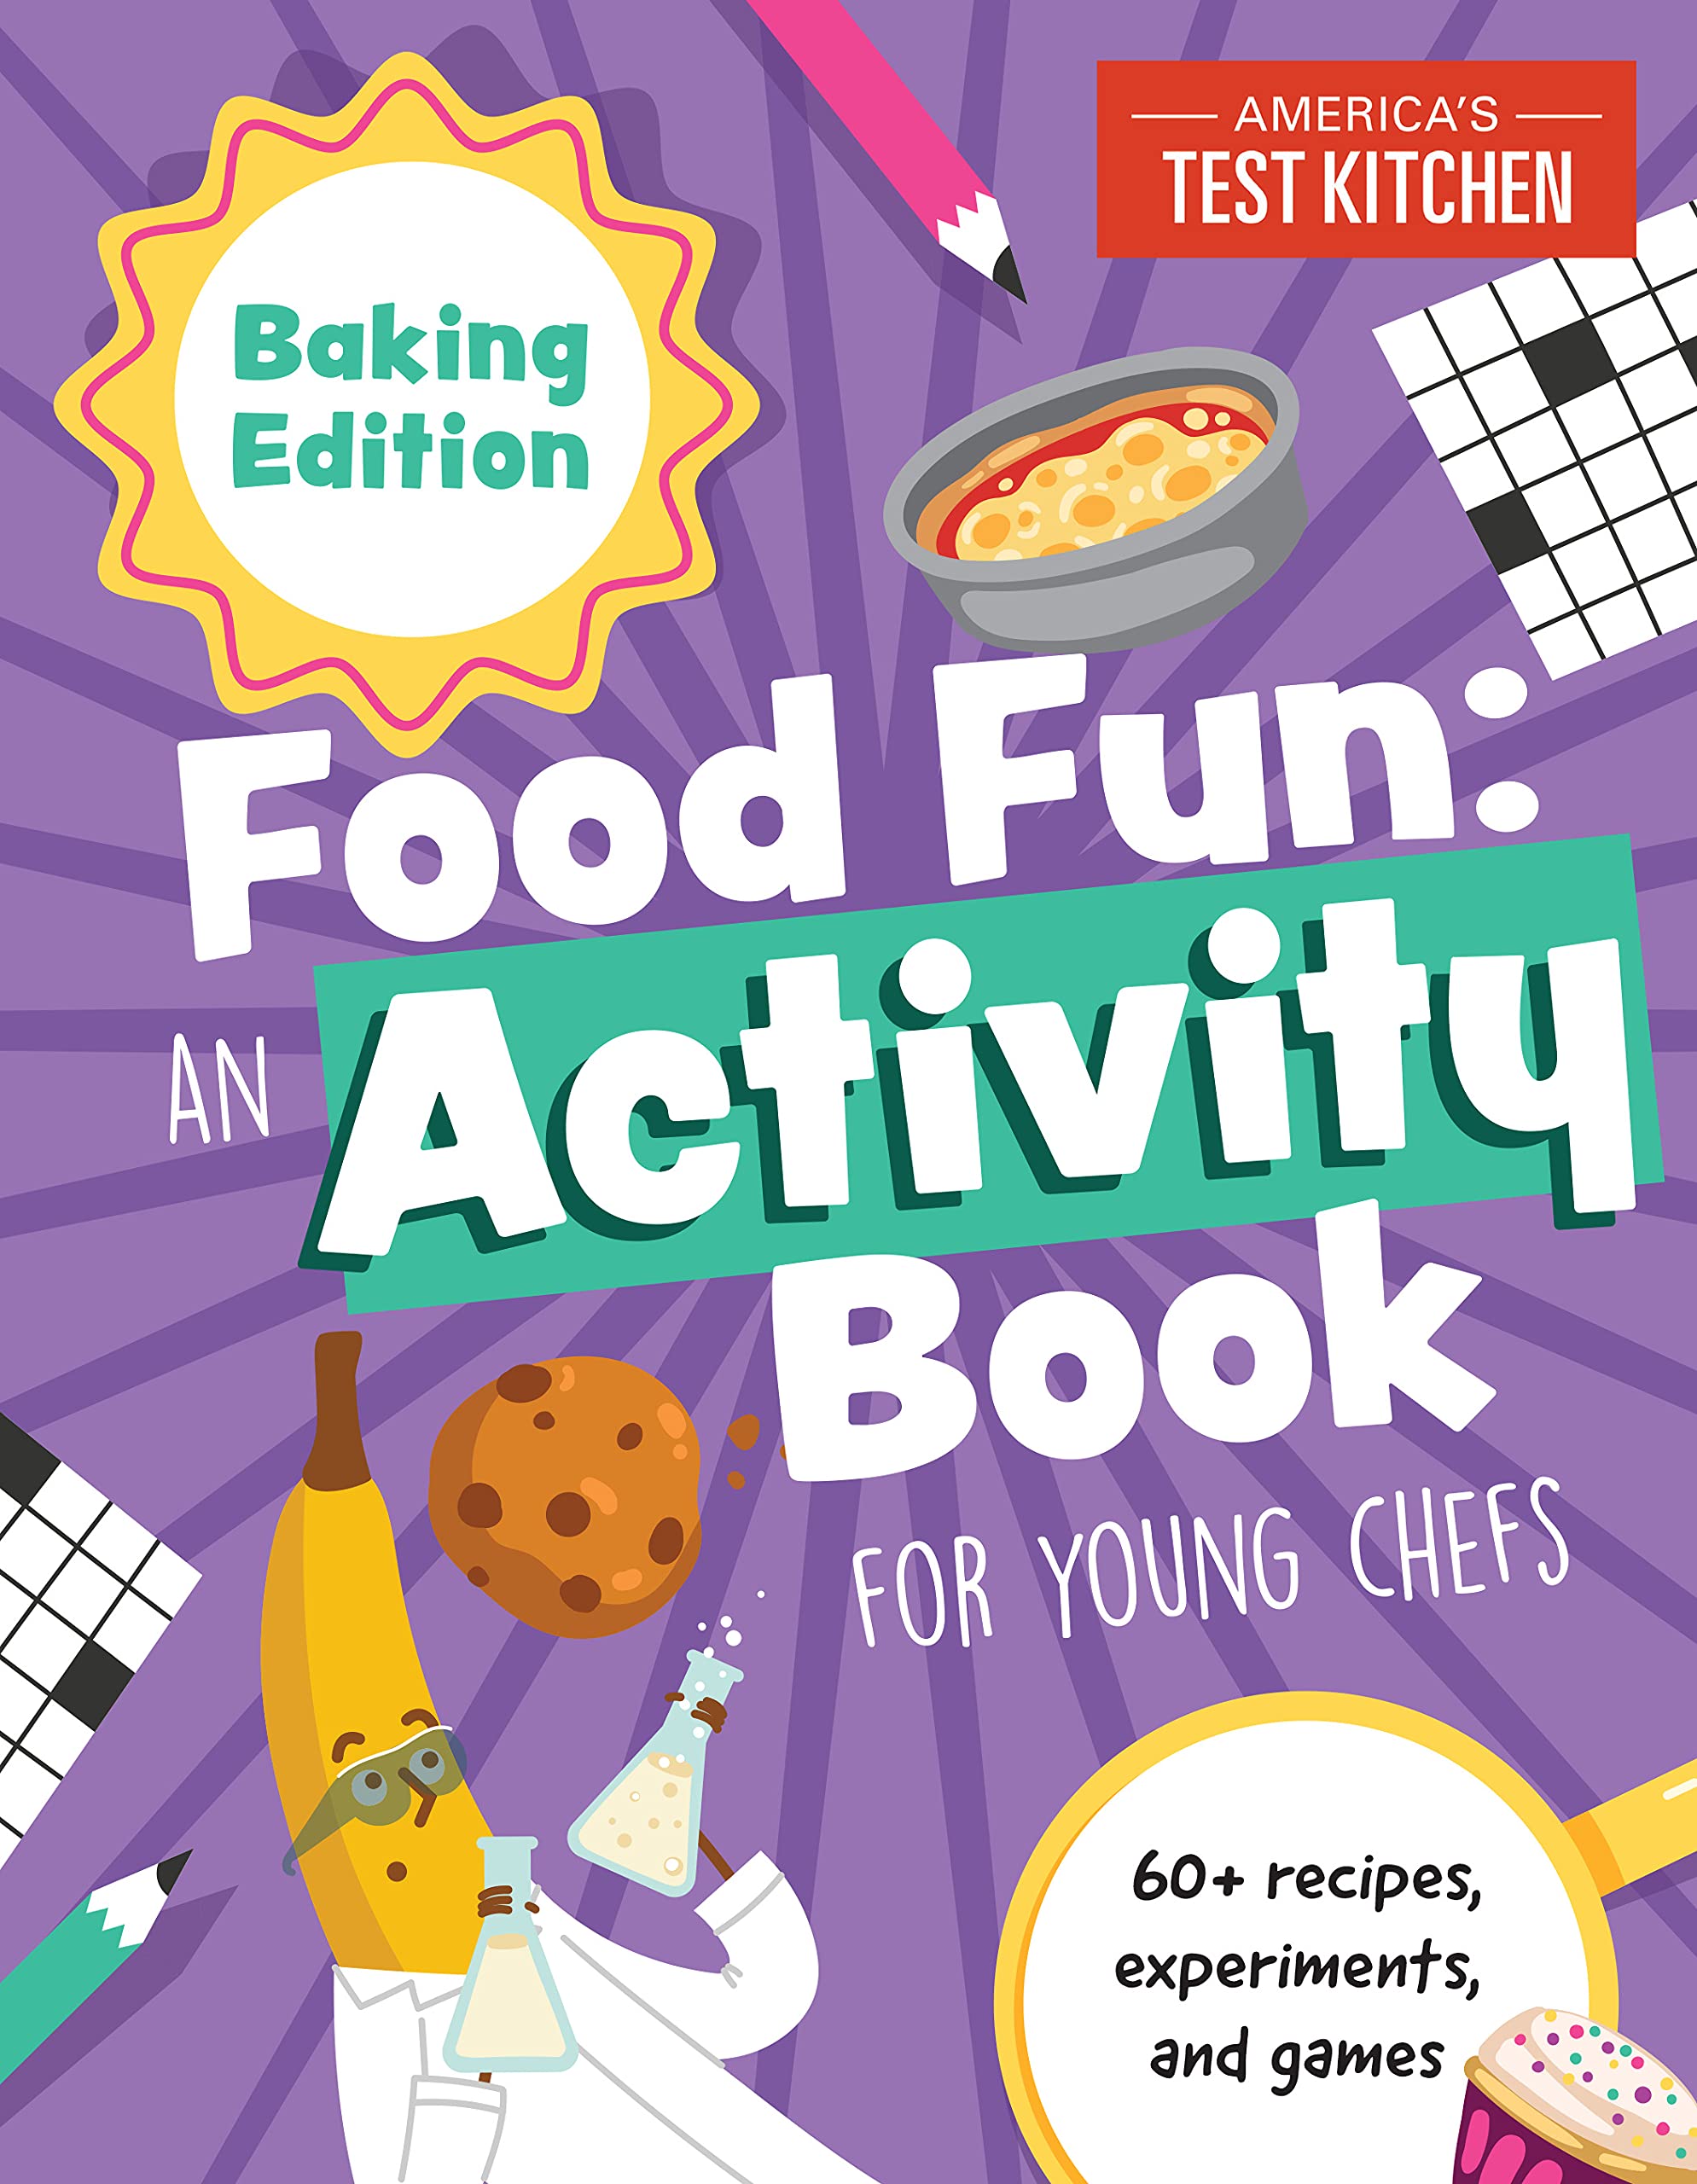 The Complete DIY Cookbook For Young Chefs